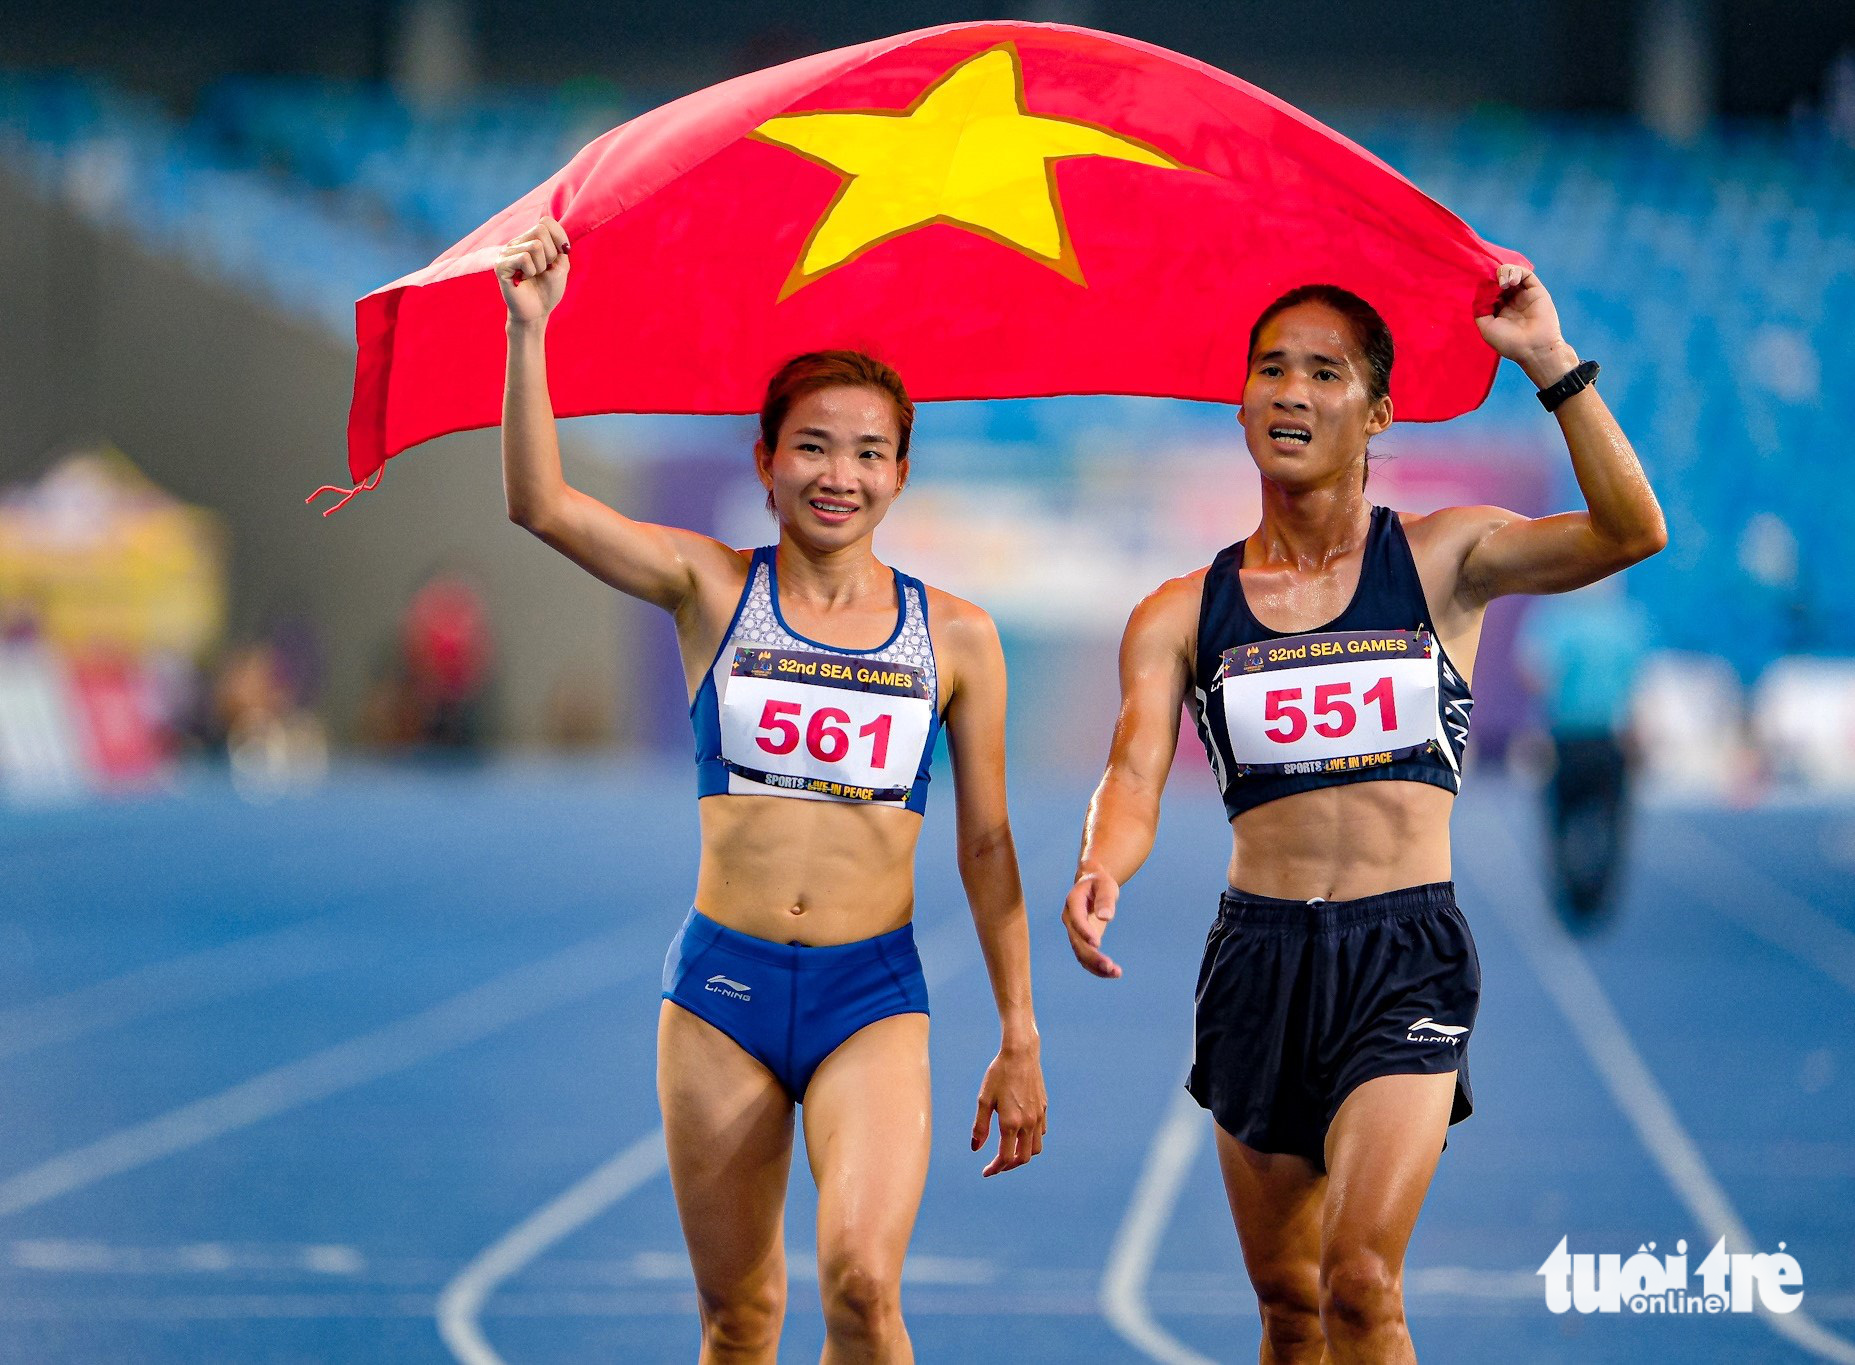 Vietnamese runner Nguyen Thi Oanh (L) smiles while wearing the national flag with a teammate after women’s events at the 2023 Southeast Asian Games in Cambodia, May 9, 2023. Photo: Nam Tran / Tuoi Tre